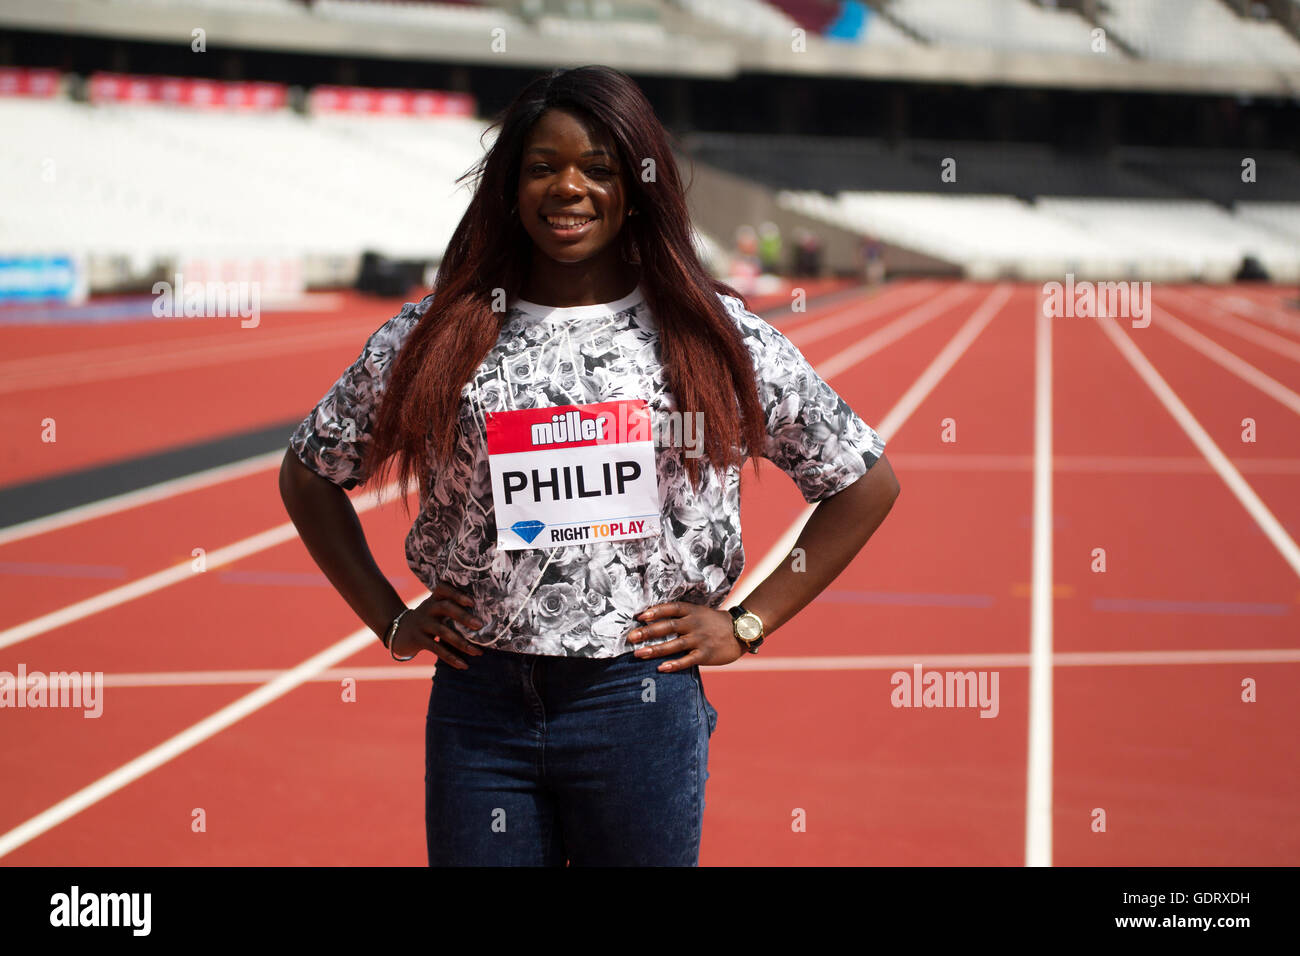 London , England - July 20, 2016 : Asha Philip of Great Britain poses for a photograph during a photo call ahead of the Muller Anniversary Games at the Olympic Stadium on July 20, 2016 in London, England. Credit:  Tom Smeeth/Alamy Live News Stock Photo